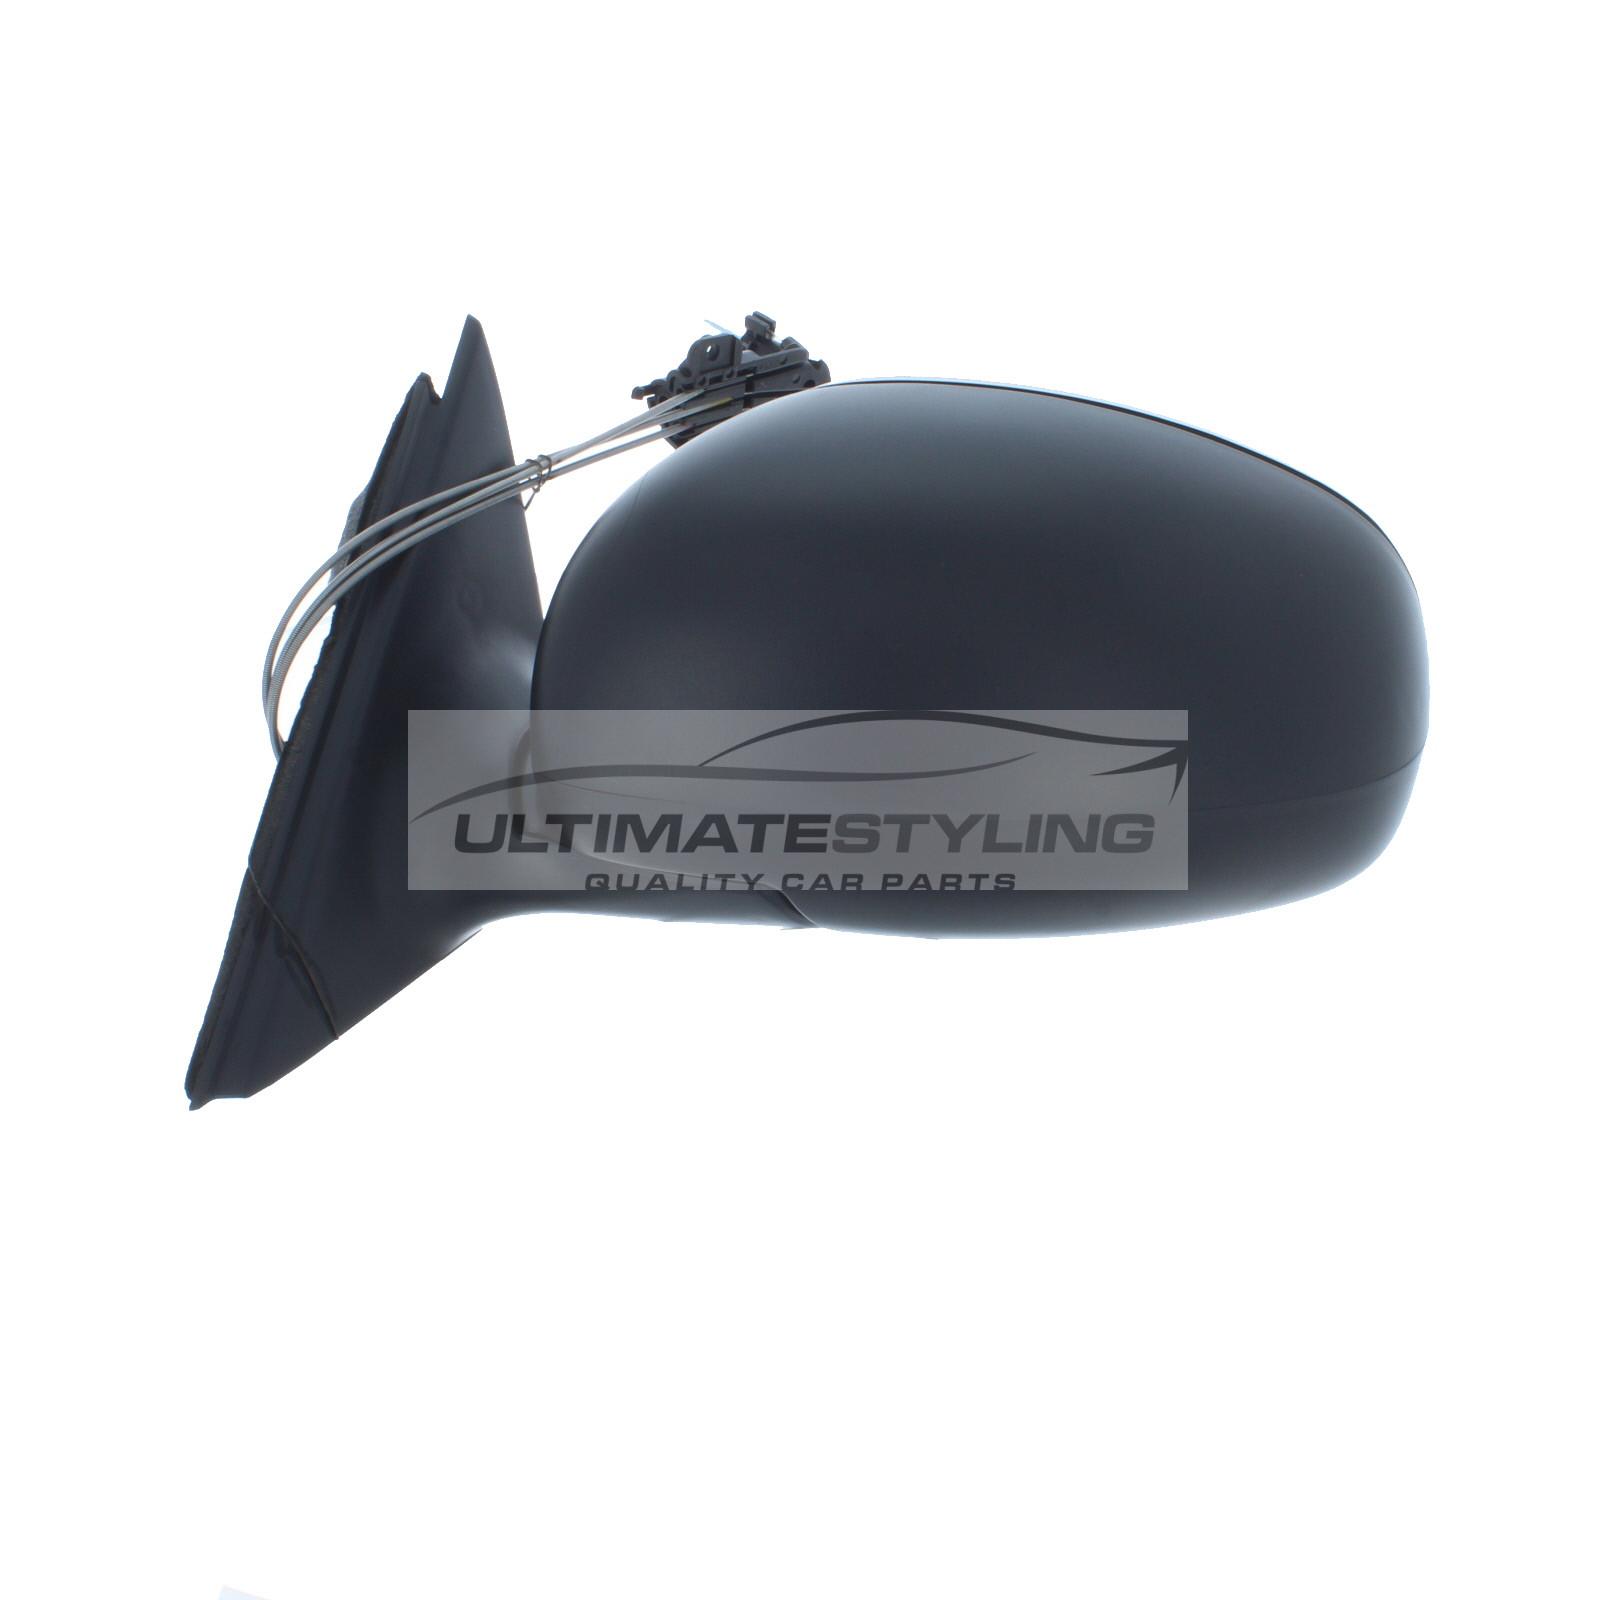 Skoda Fabia Wing Mirror / Door Mirror - Passenger Side (LH) - Cable adjustment - Non-Heated Glass - Black - Smooth Finish